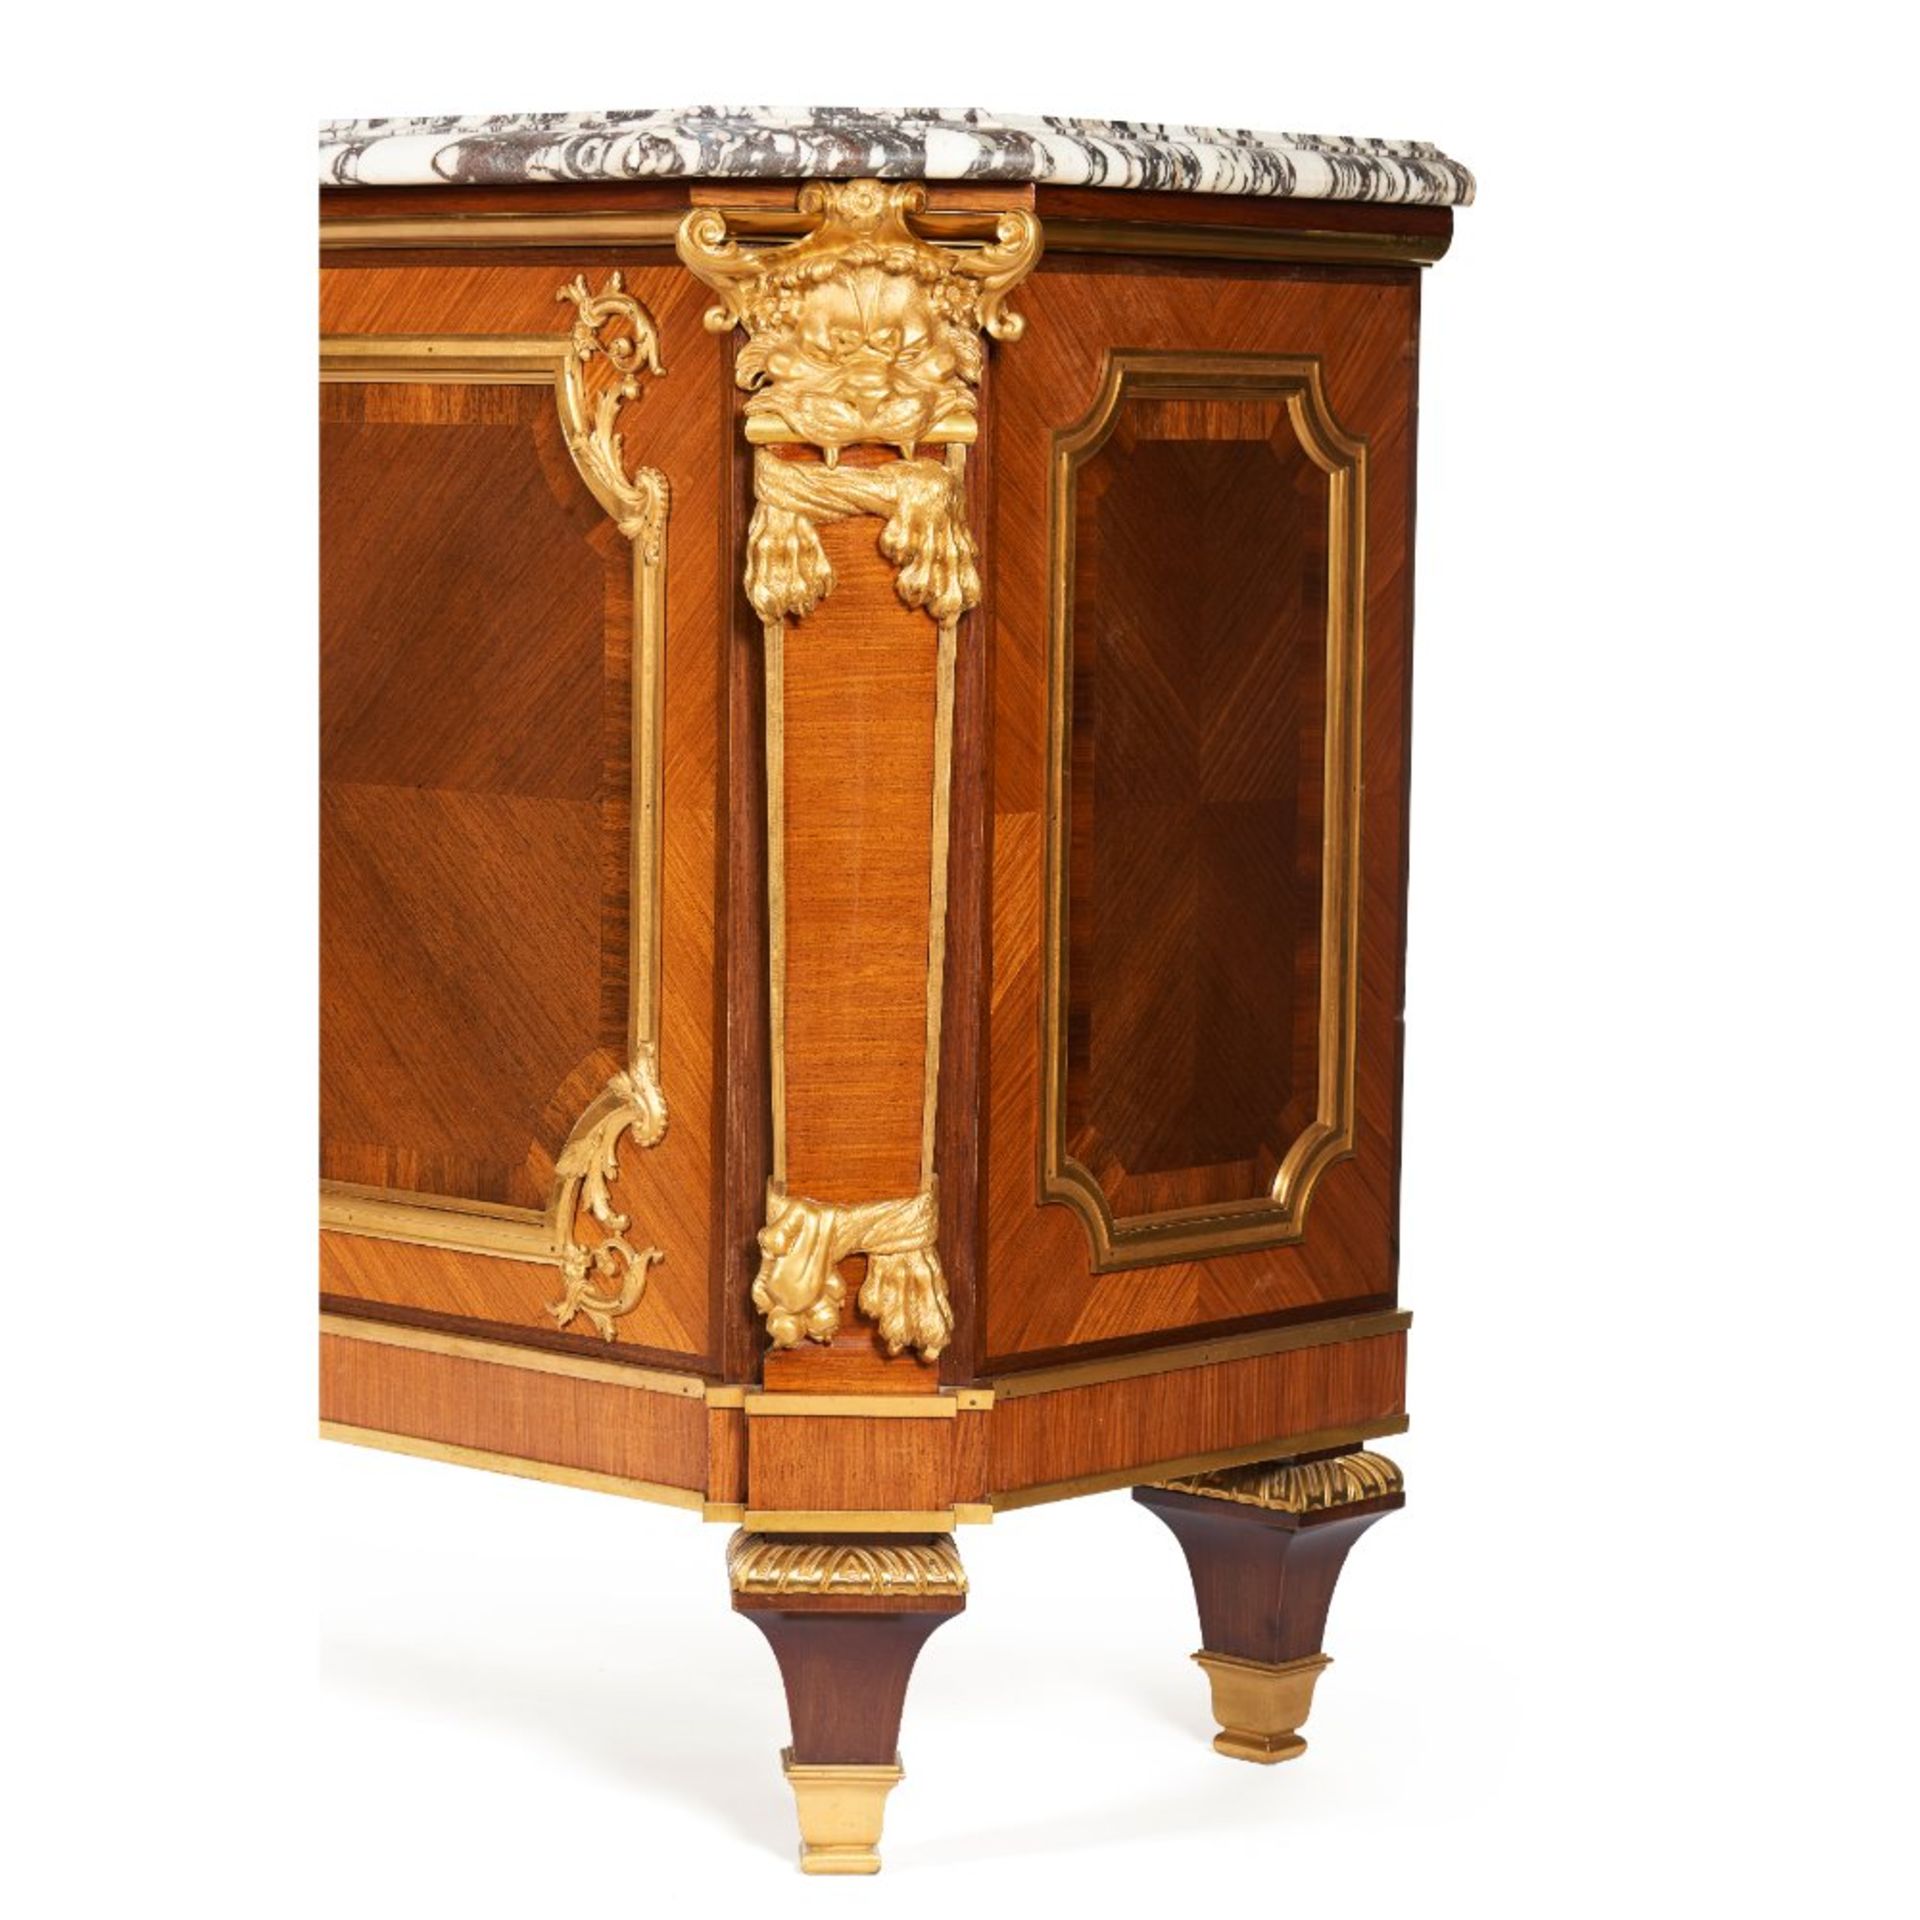 A French "A vanteaux" commode, Attrib. Jansen - Image 5 of 5